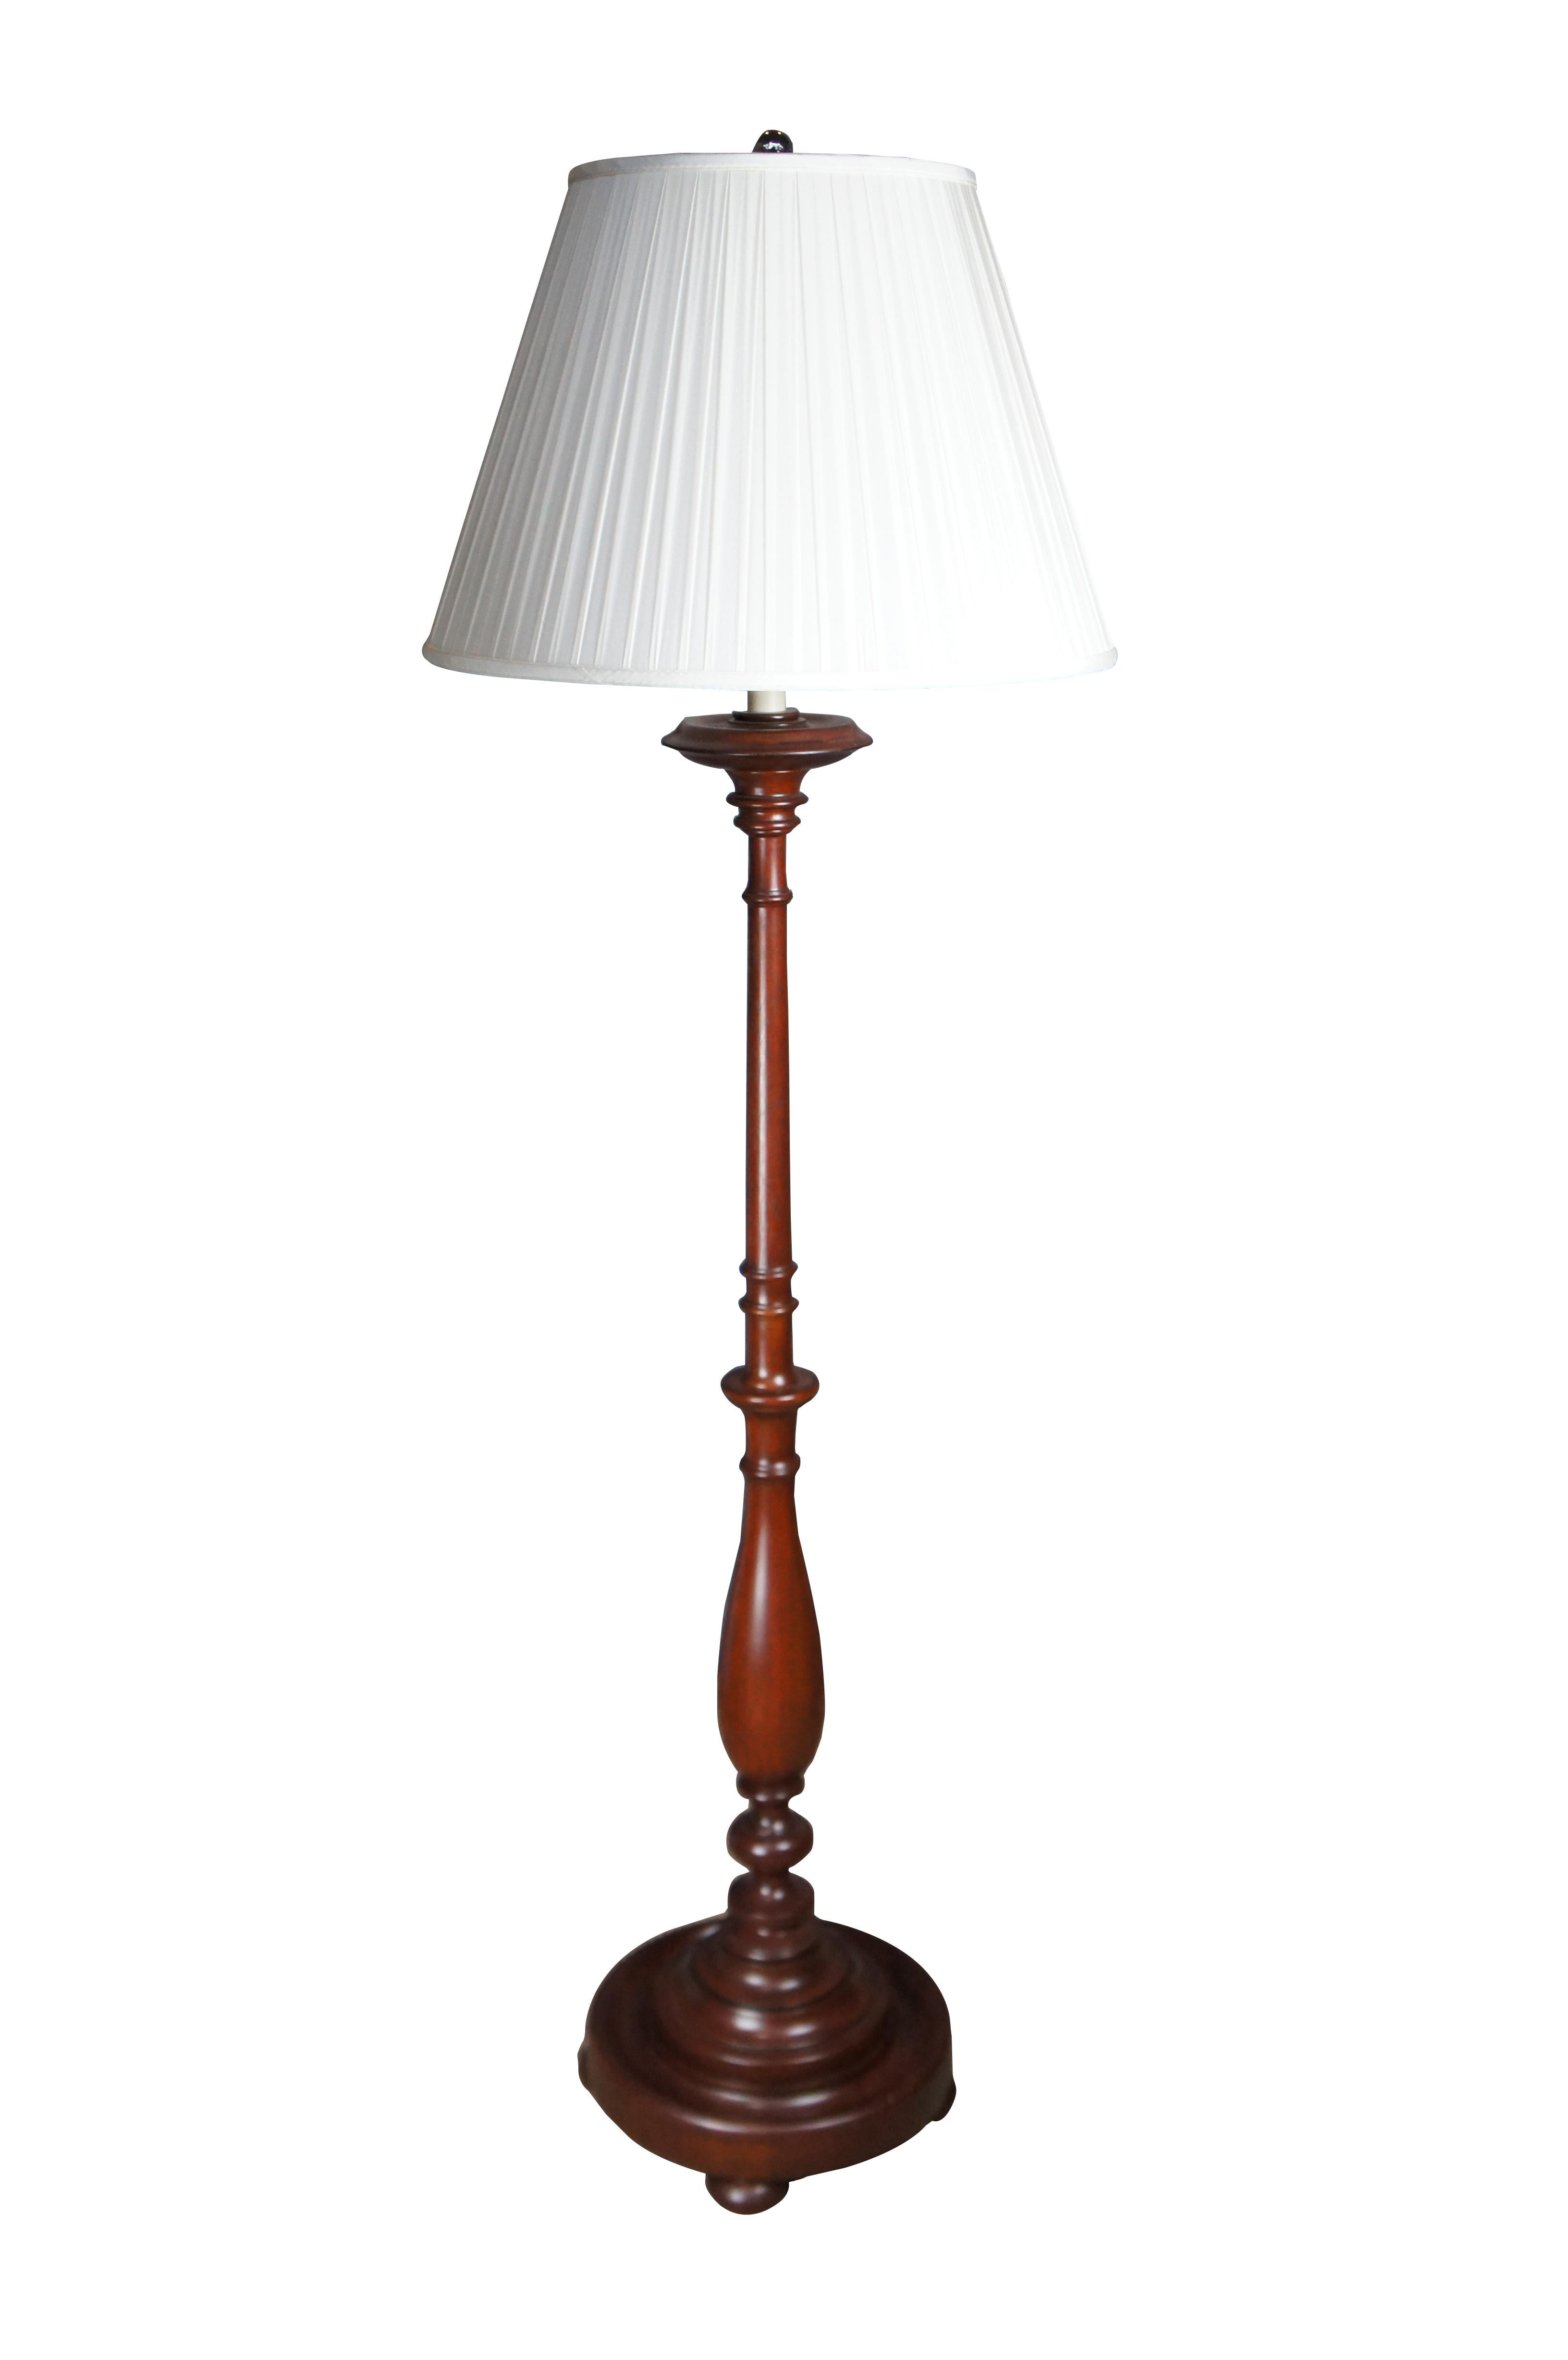 American Colonial Ralph Lauren Traditional Mahogany Candle Stand Floor Lamp Adjustable Height 68